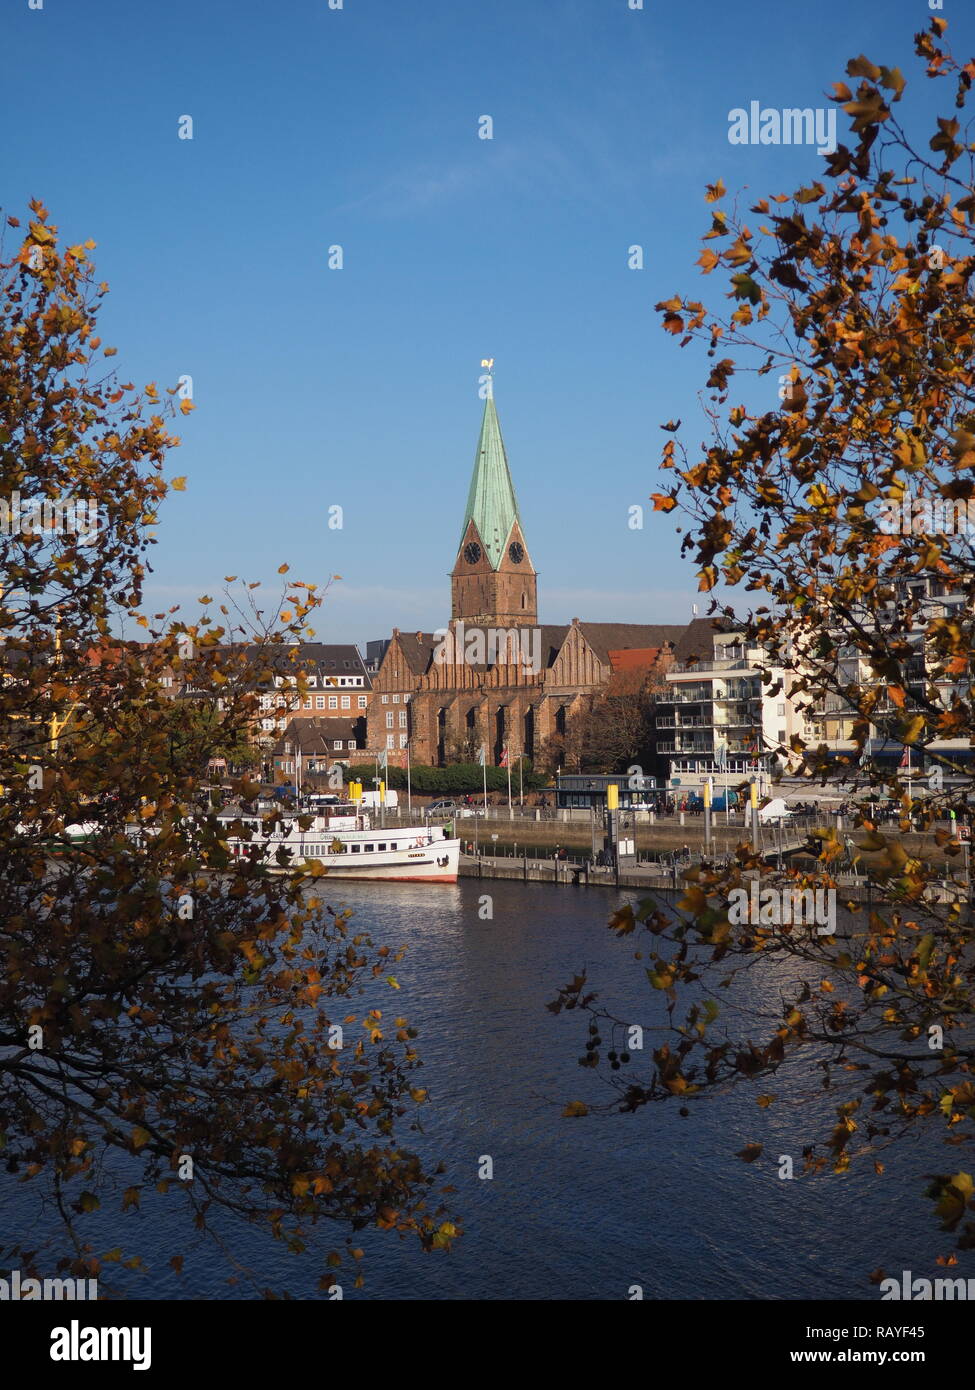 Bremen, Germany - River Weser with St. Martini church framed by trees in the foreground Stock Photo